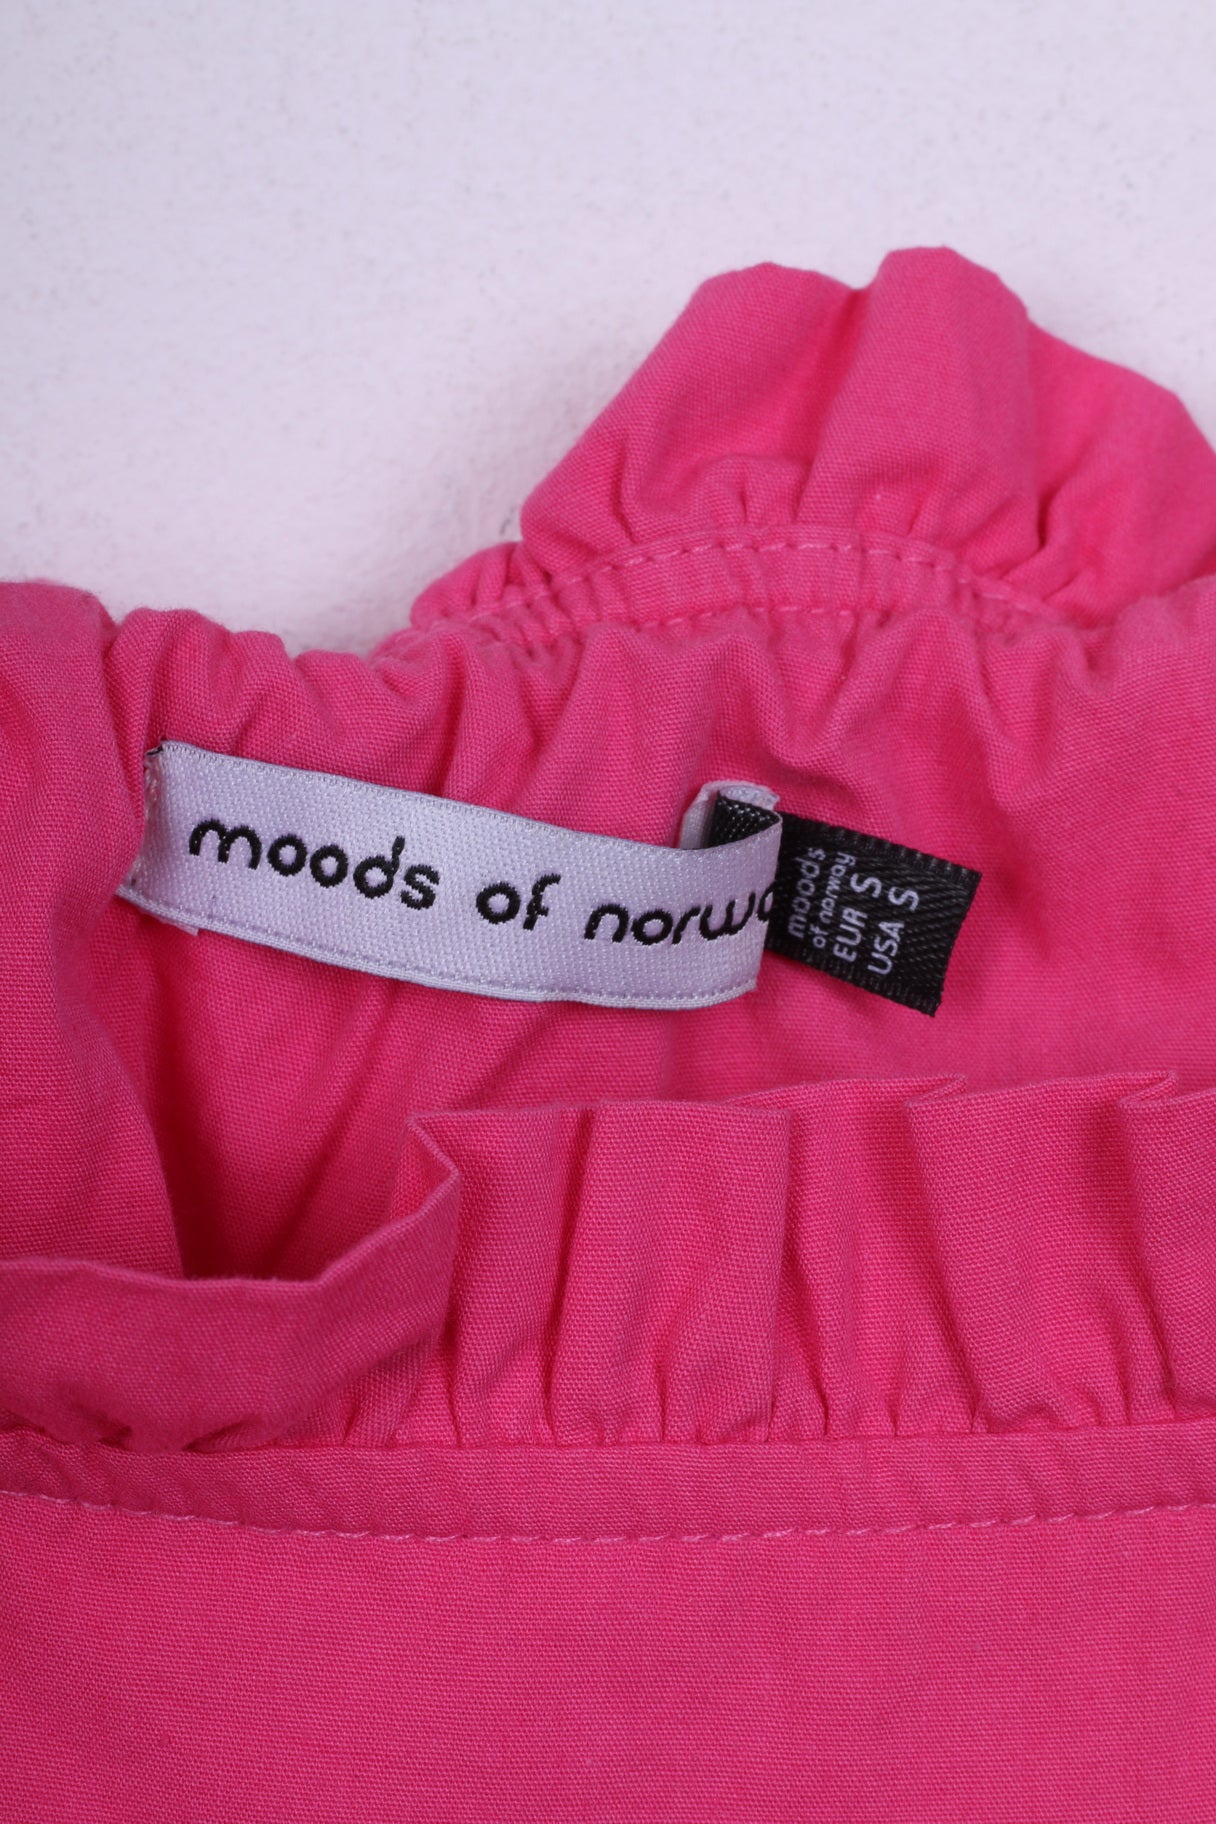 Moods Of Norway Womens S Tunic Shirt Spaghetti Straps Pink Graphic Cotton Summer